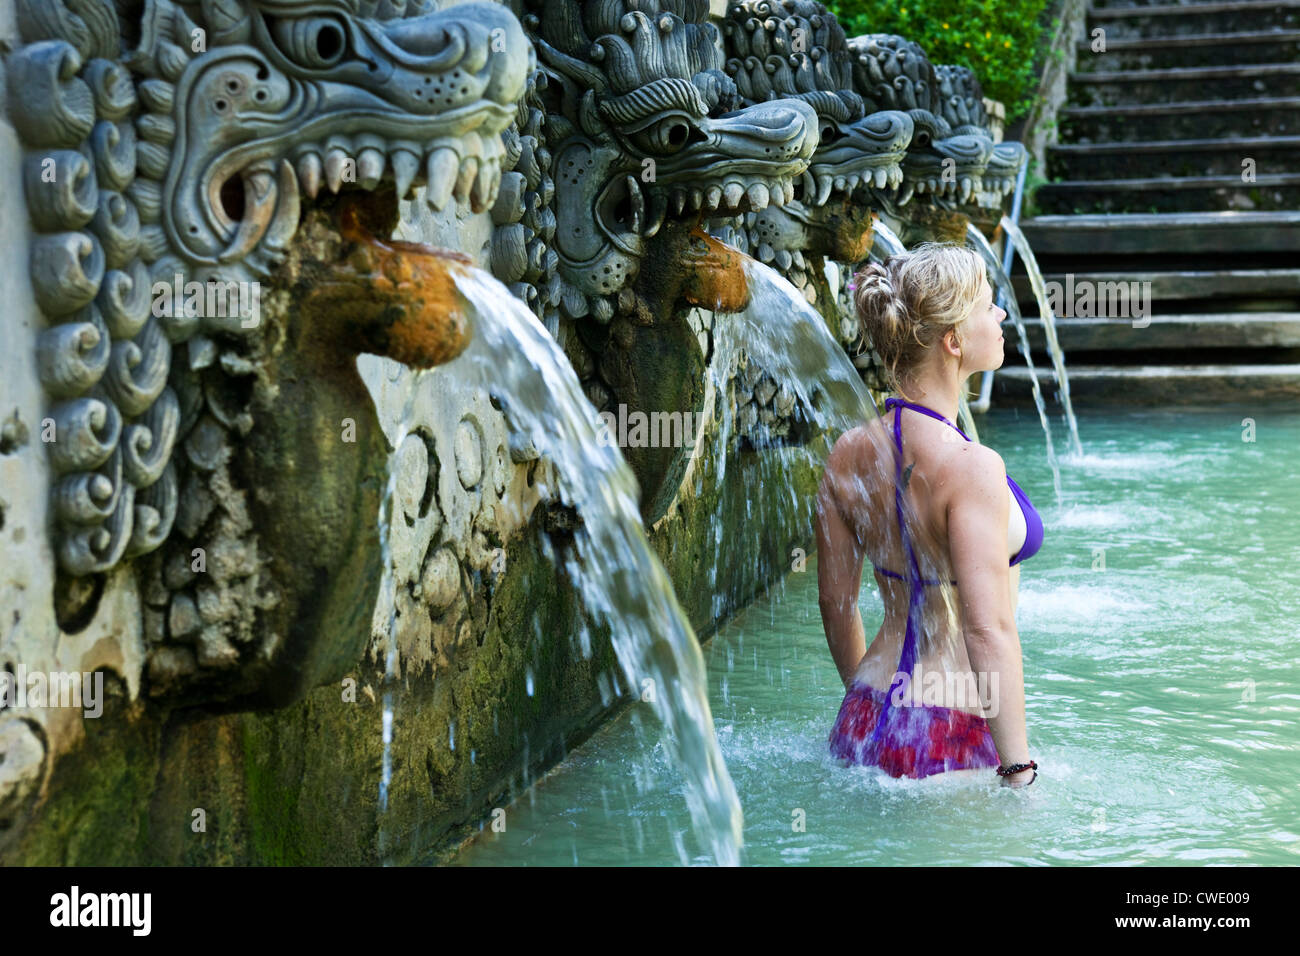 A beautiful woman relaxing in a hot springs surrounded by a lush jungle and flowers in Bali, Indonesia. Stock Photo